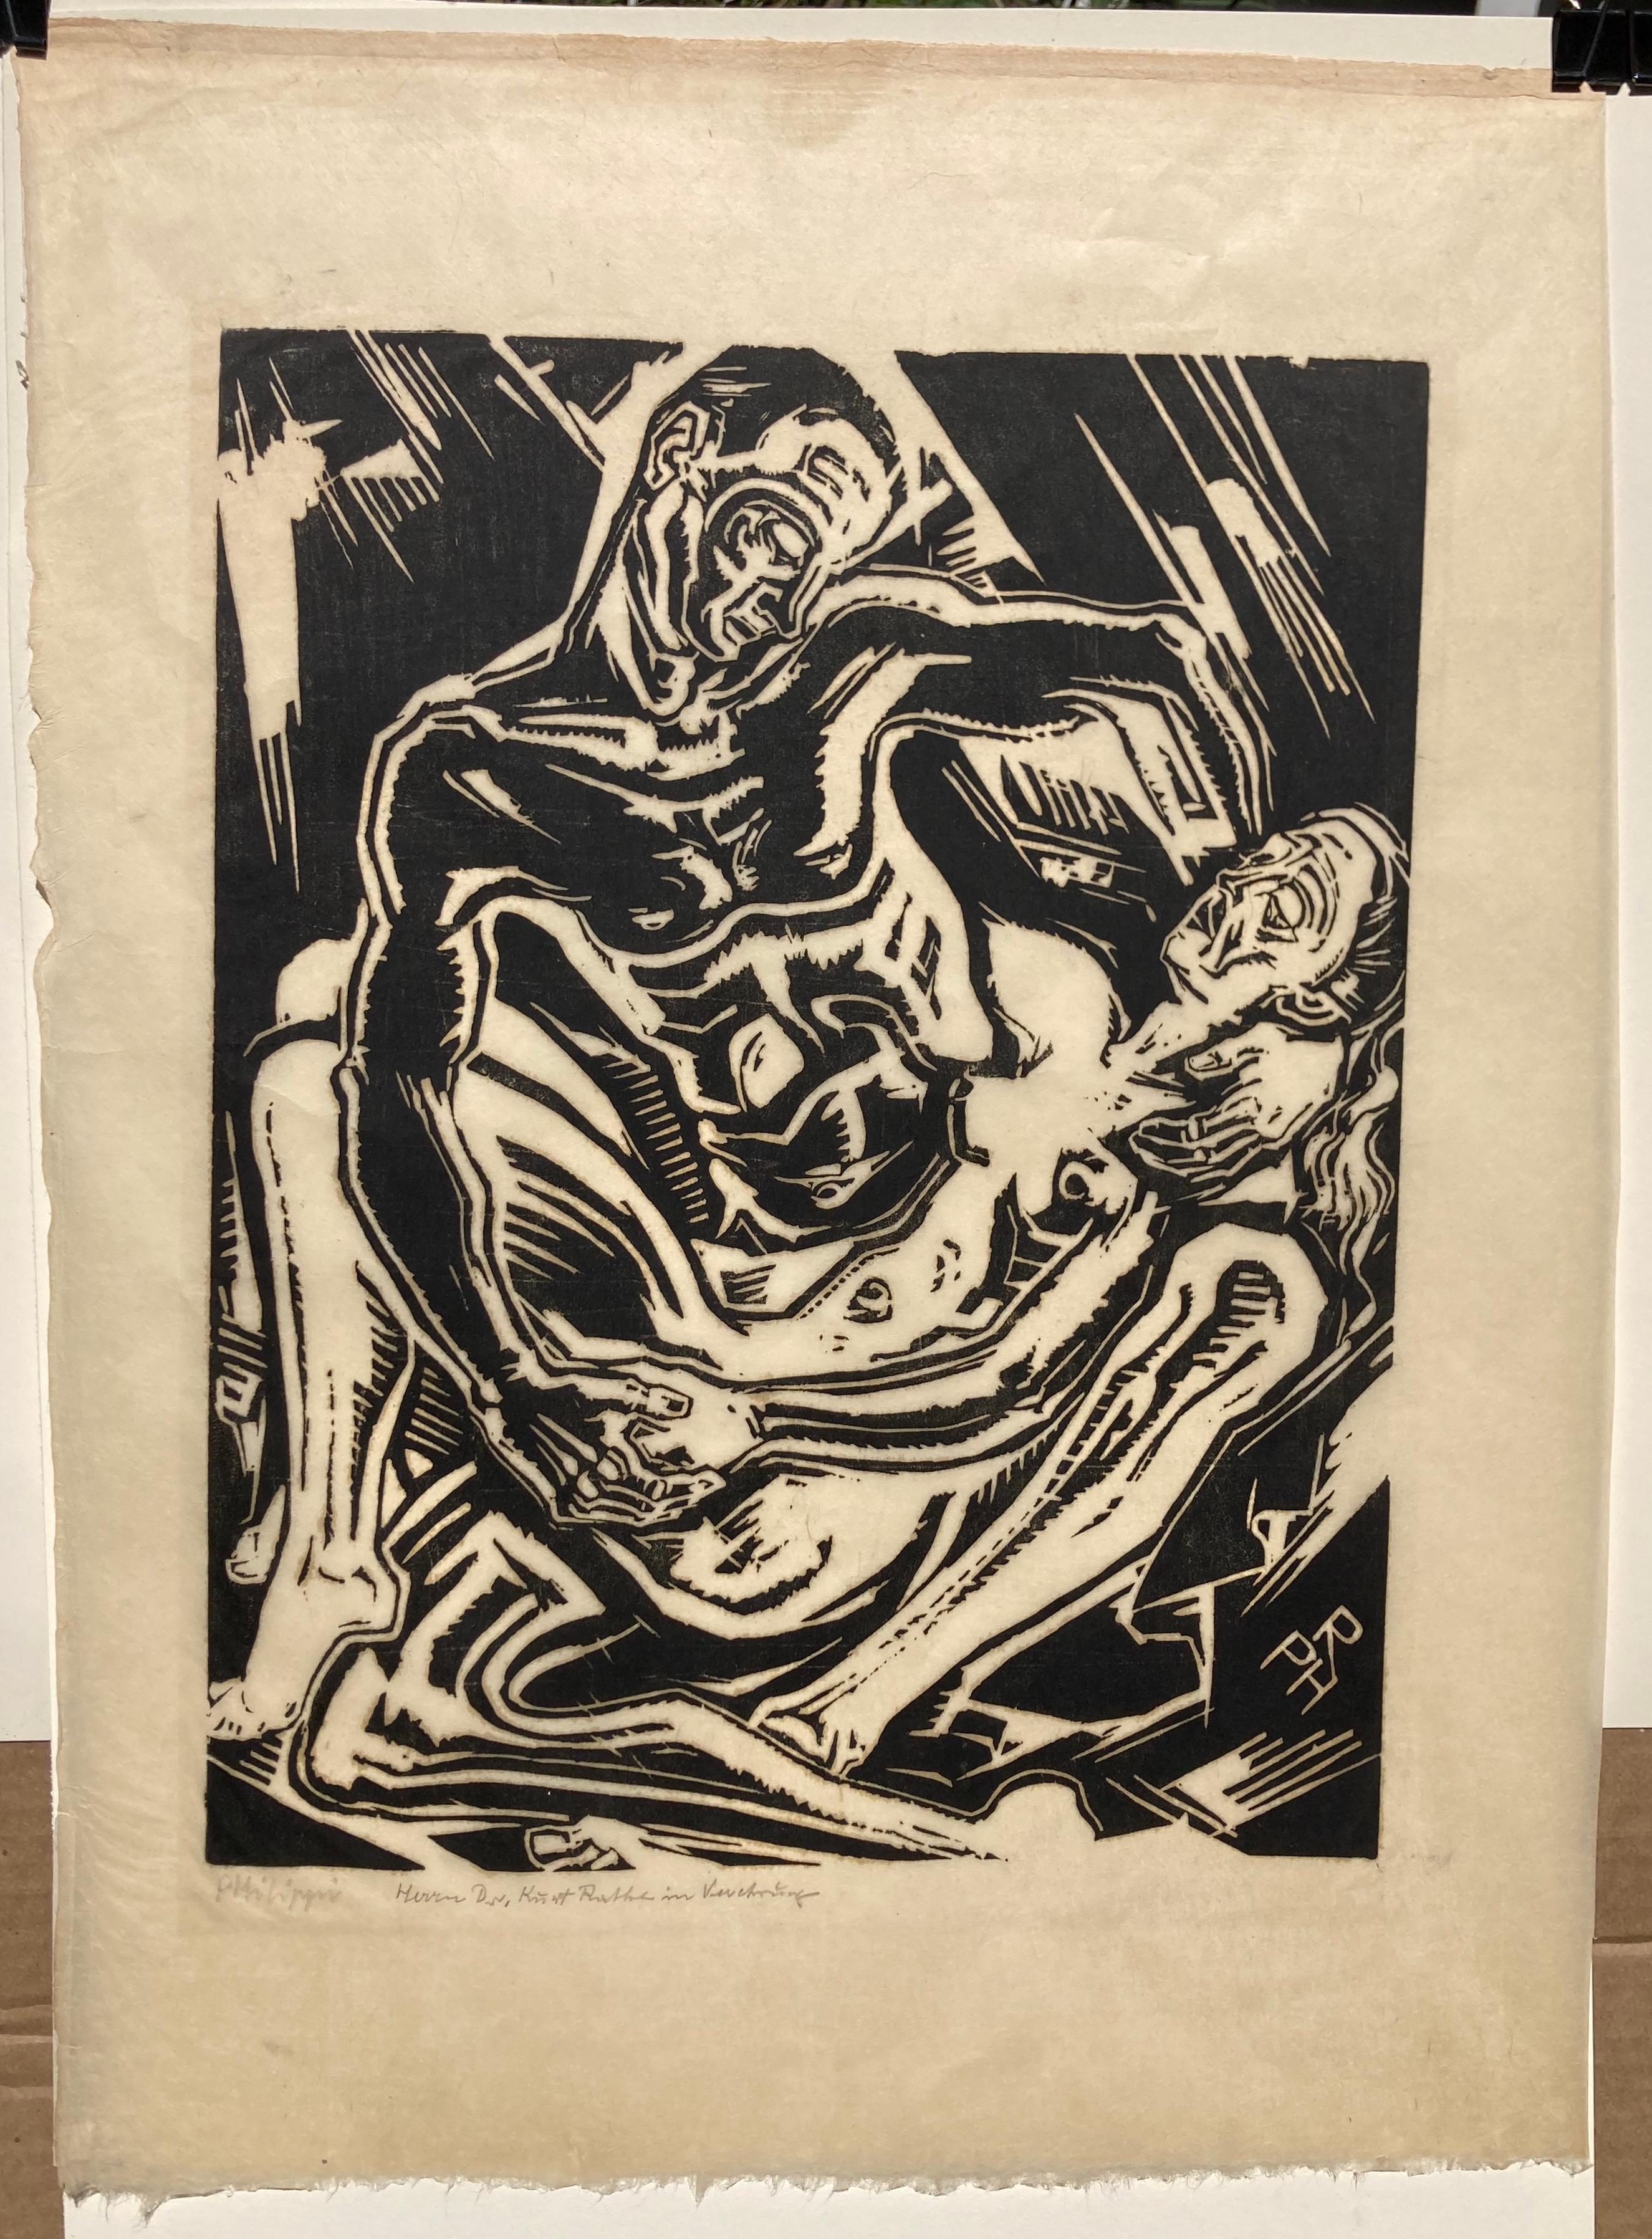 LOVERS (LIEBESPAAR - Expressionist Print by Robert Philippi